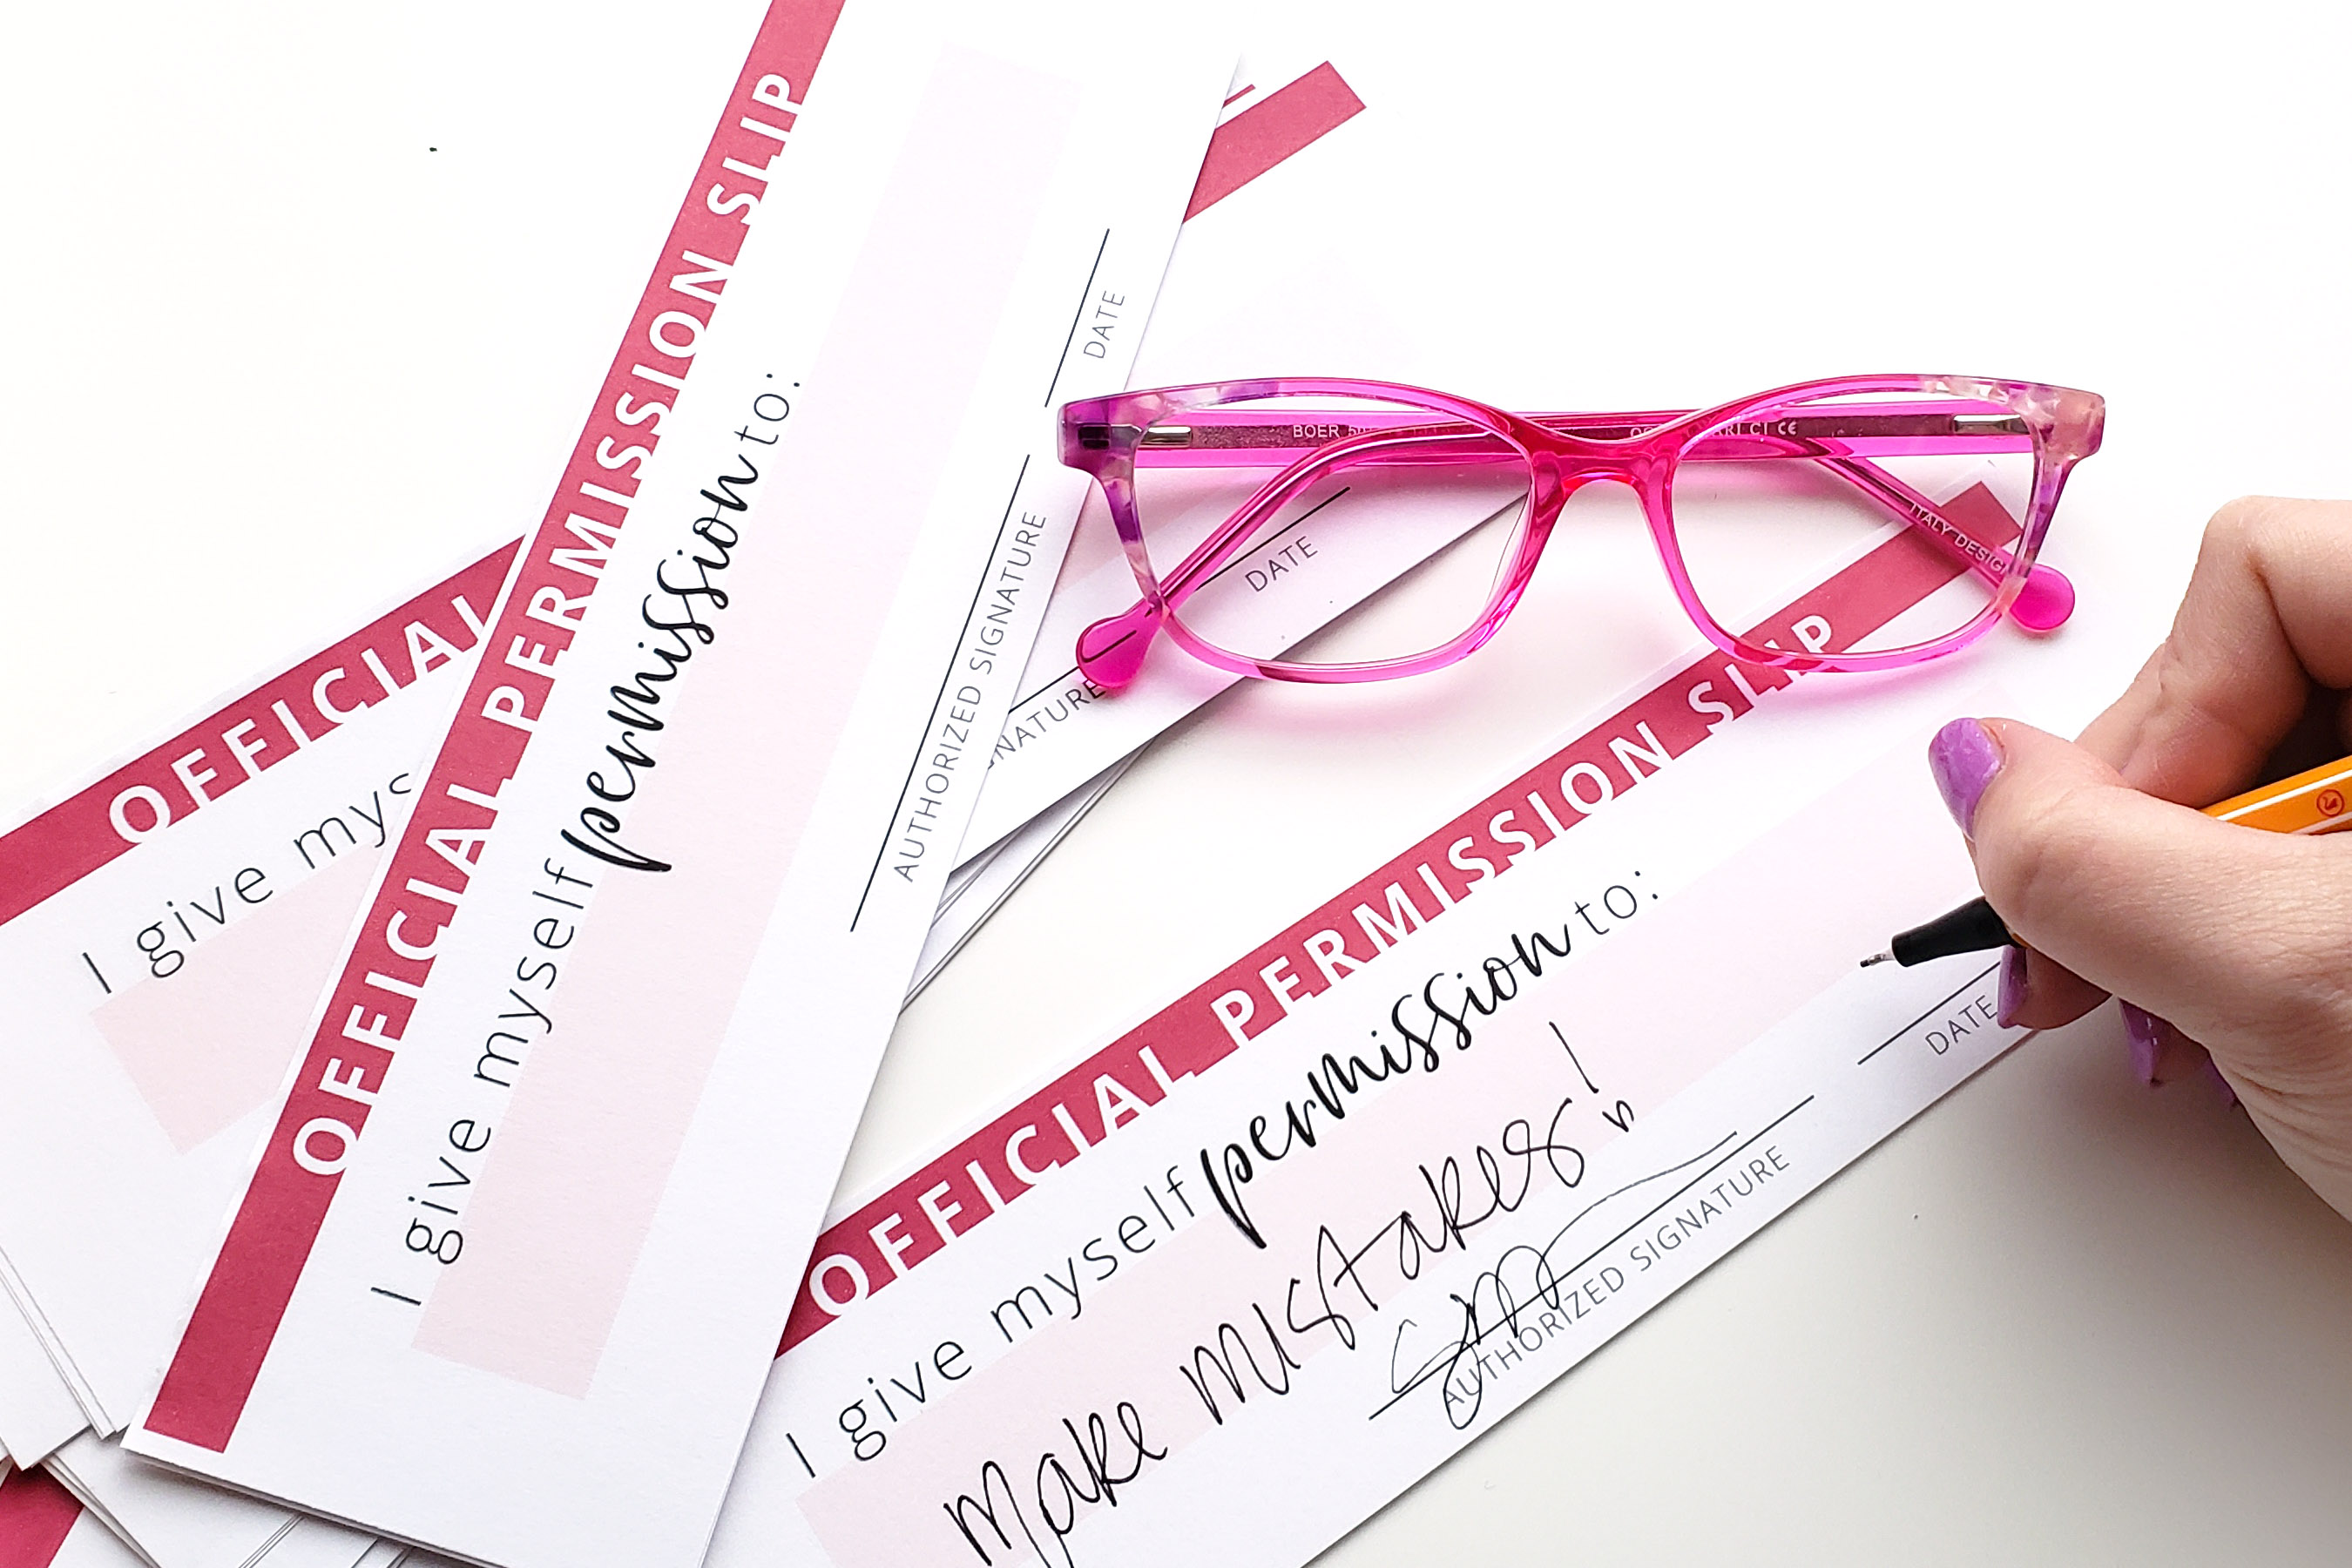 Download Your Free Printable Permission Slips Today